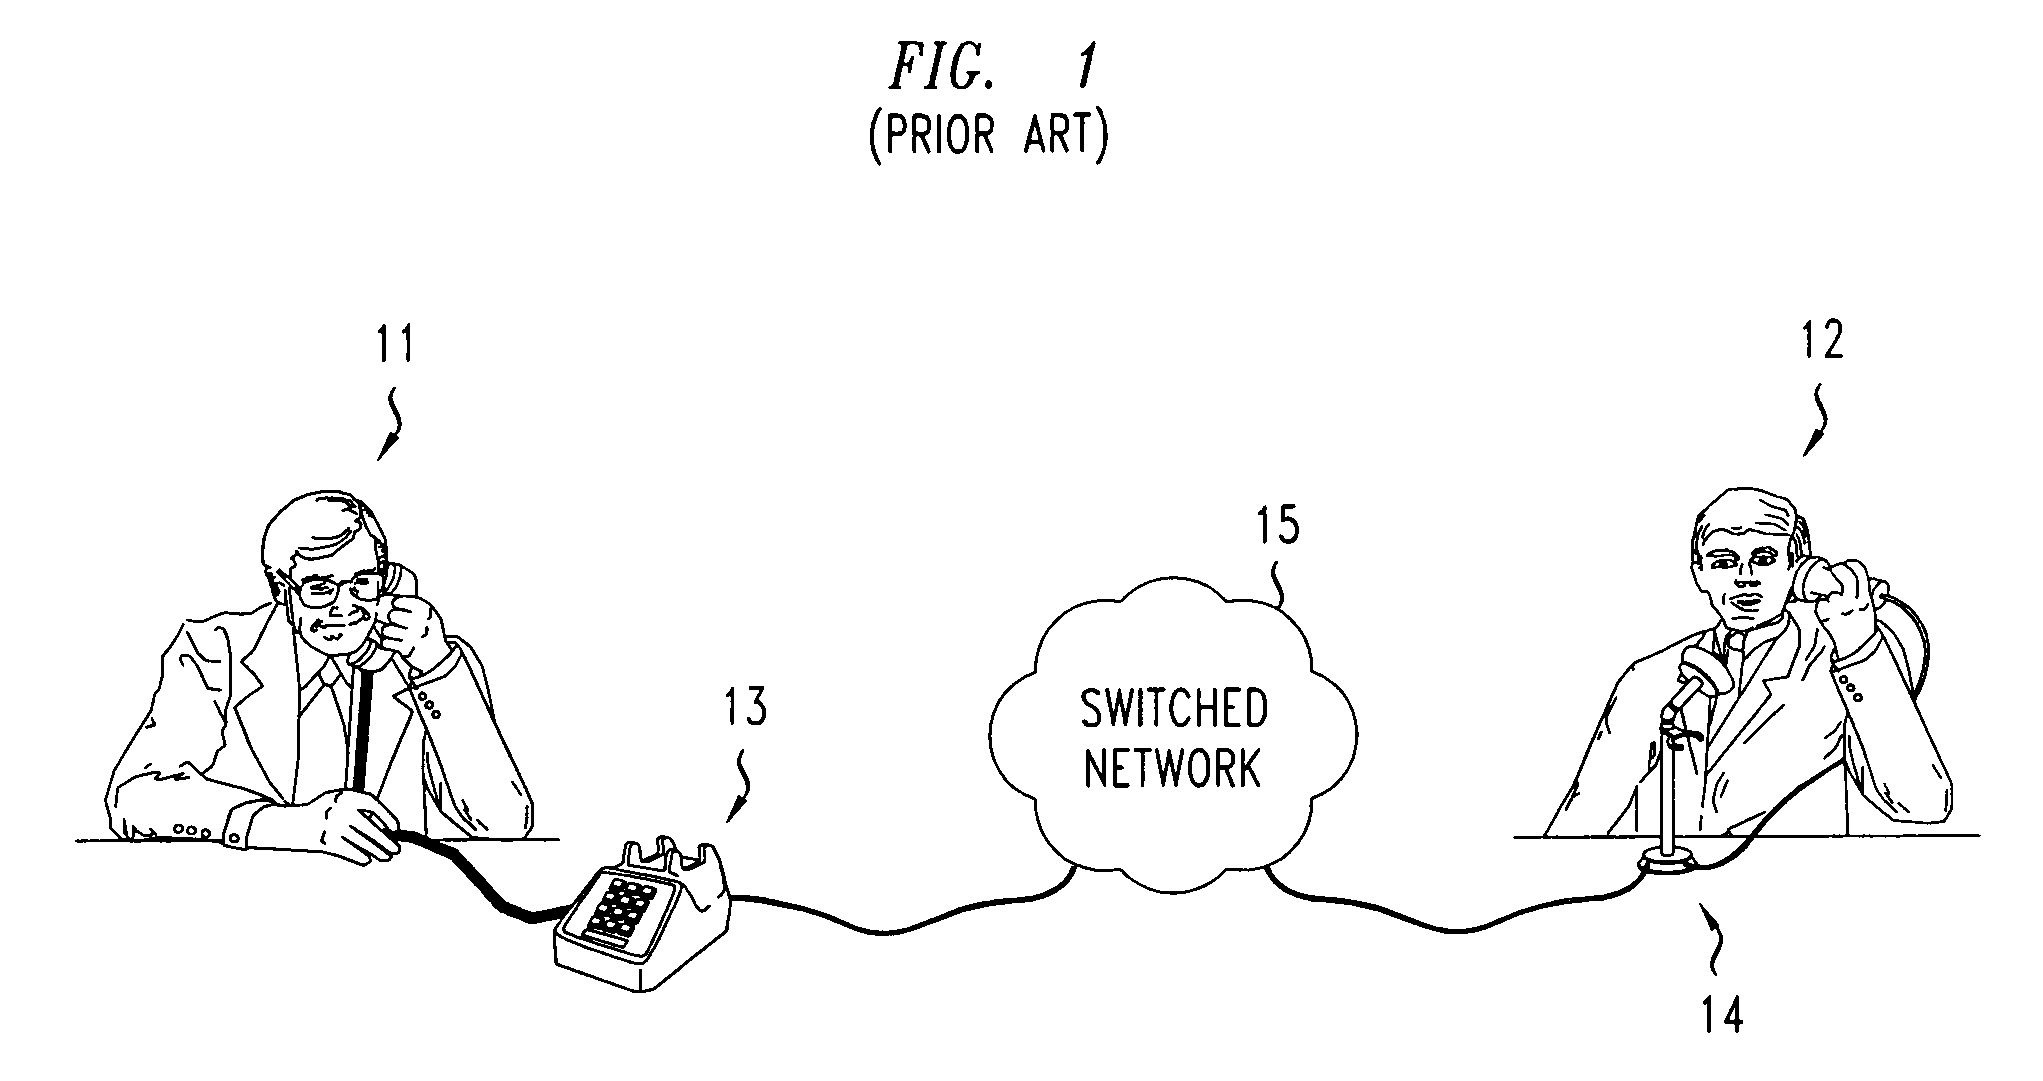 Method and apparatus for active speaker selection using microphone arrays and speaker recognition